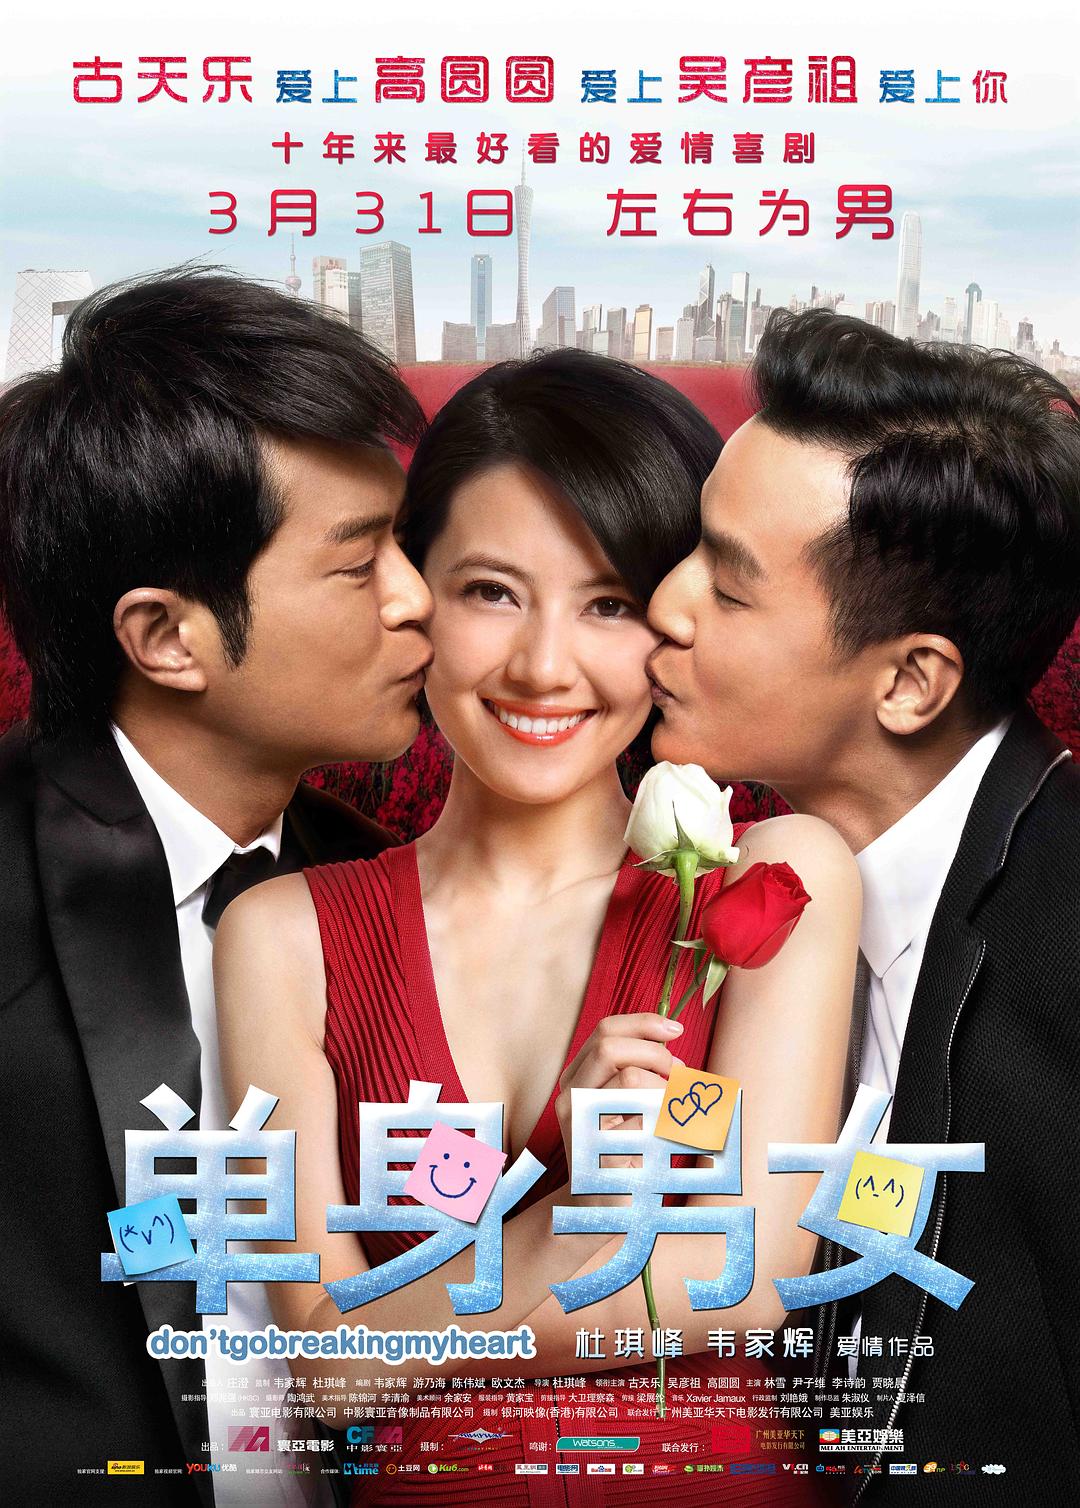 Ů Dont.Go.Breaking.My.Heart.2011.CHINESE.1080p.BluRay.x264.DTS-PTer 7.69GB-1.png